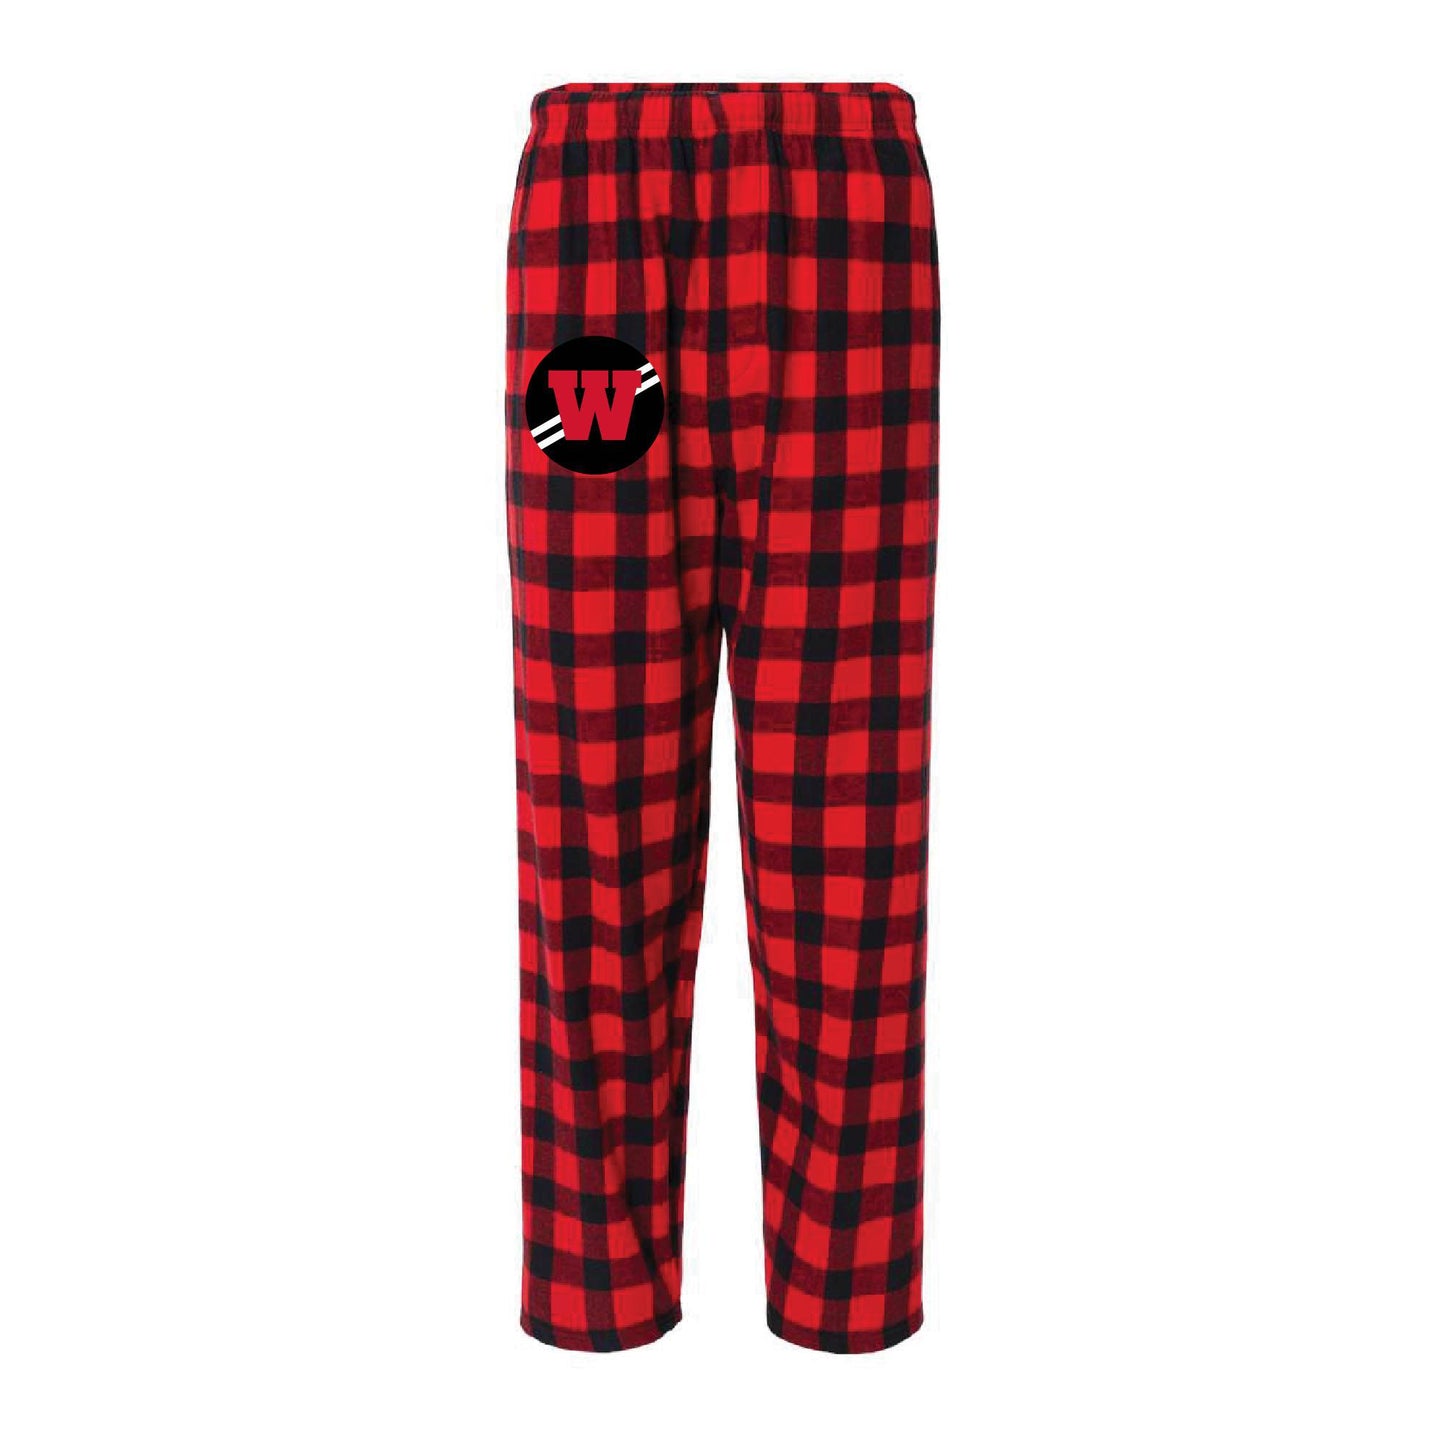 WHS Track & Field Flannel Lounge Pant in Buffalo Plaid